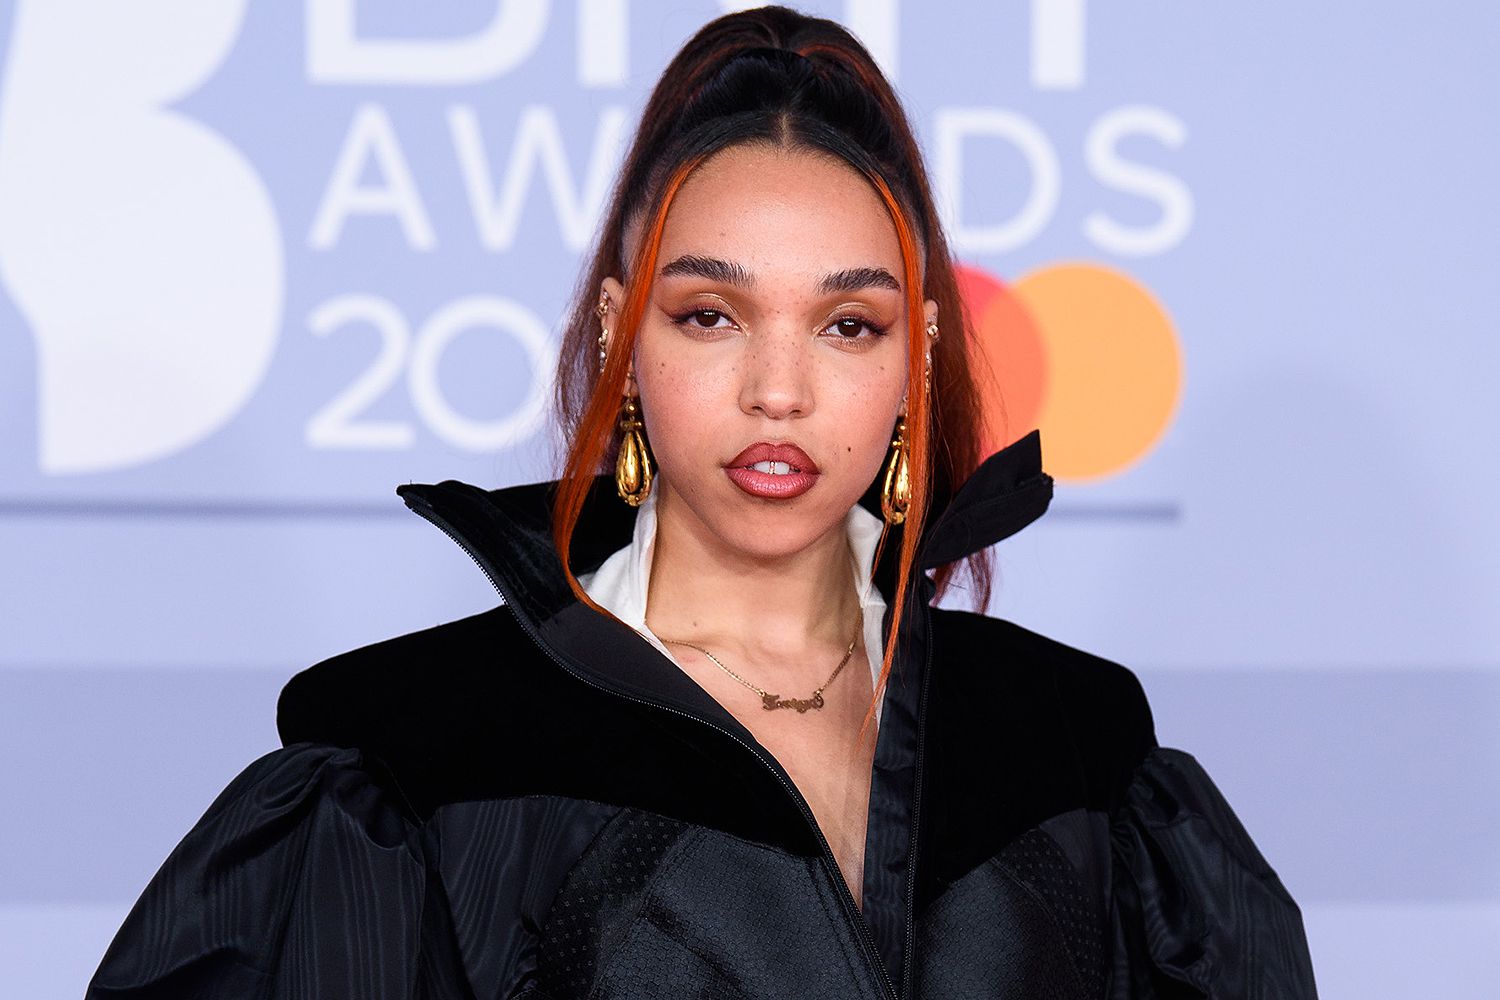 FKA Twigs’ Calvin Klein Ad Banned In UK, Sparks Controversy Over Double Standards